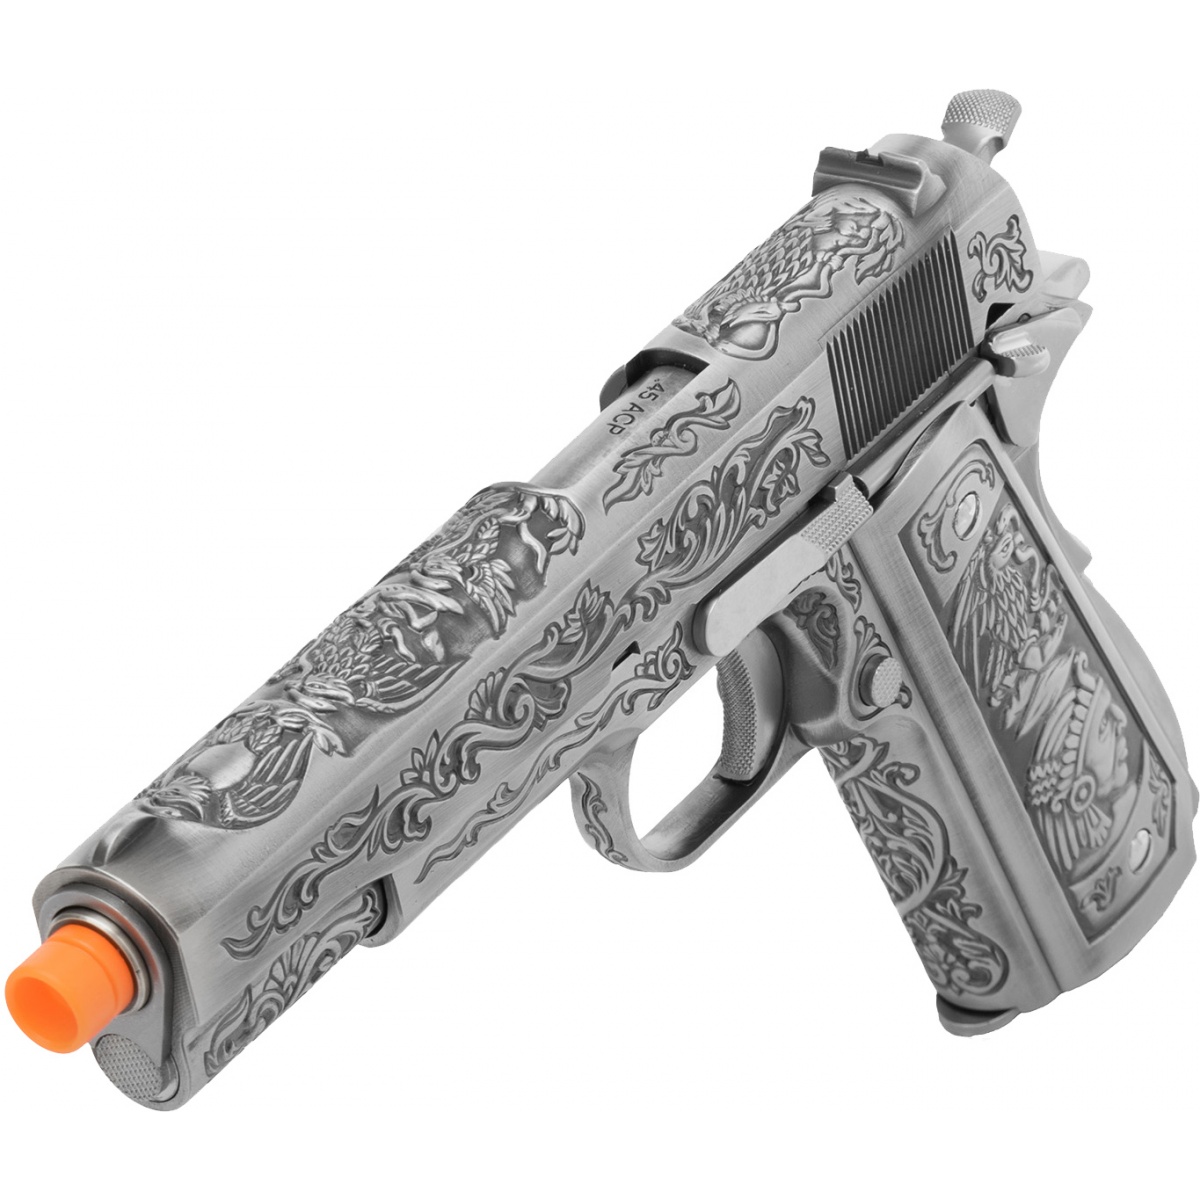 Lancer Tactical WE Full Metal Airsoft Gas Blowback Floral Pattern Pistol 1911 Silver 